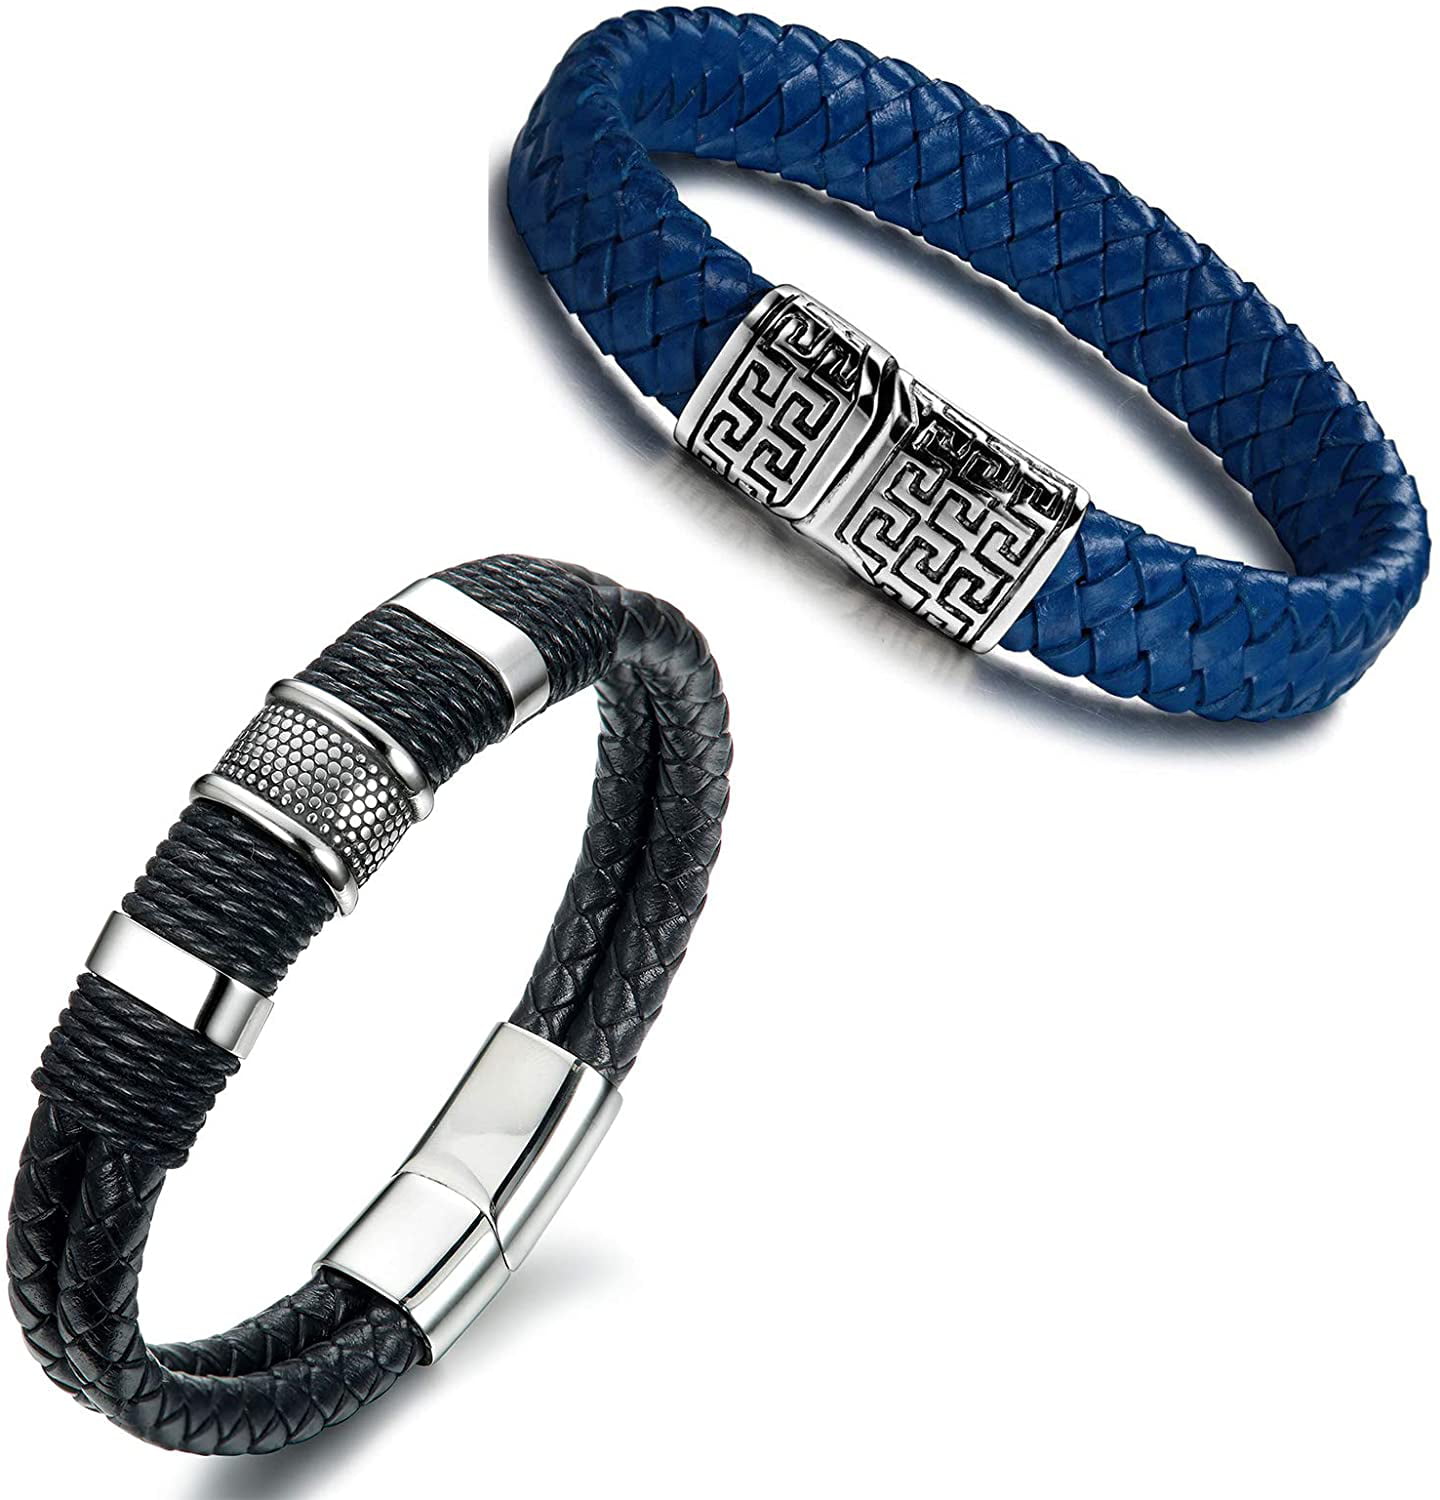 Stainless Steel Braided Leather Bracelet for Men Classic Designed Cuff Bracelet Magnetic Clasp 7.0-8.0 inches